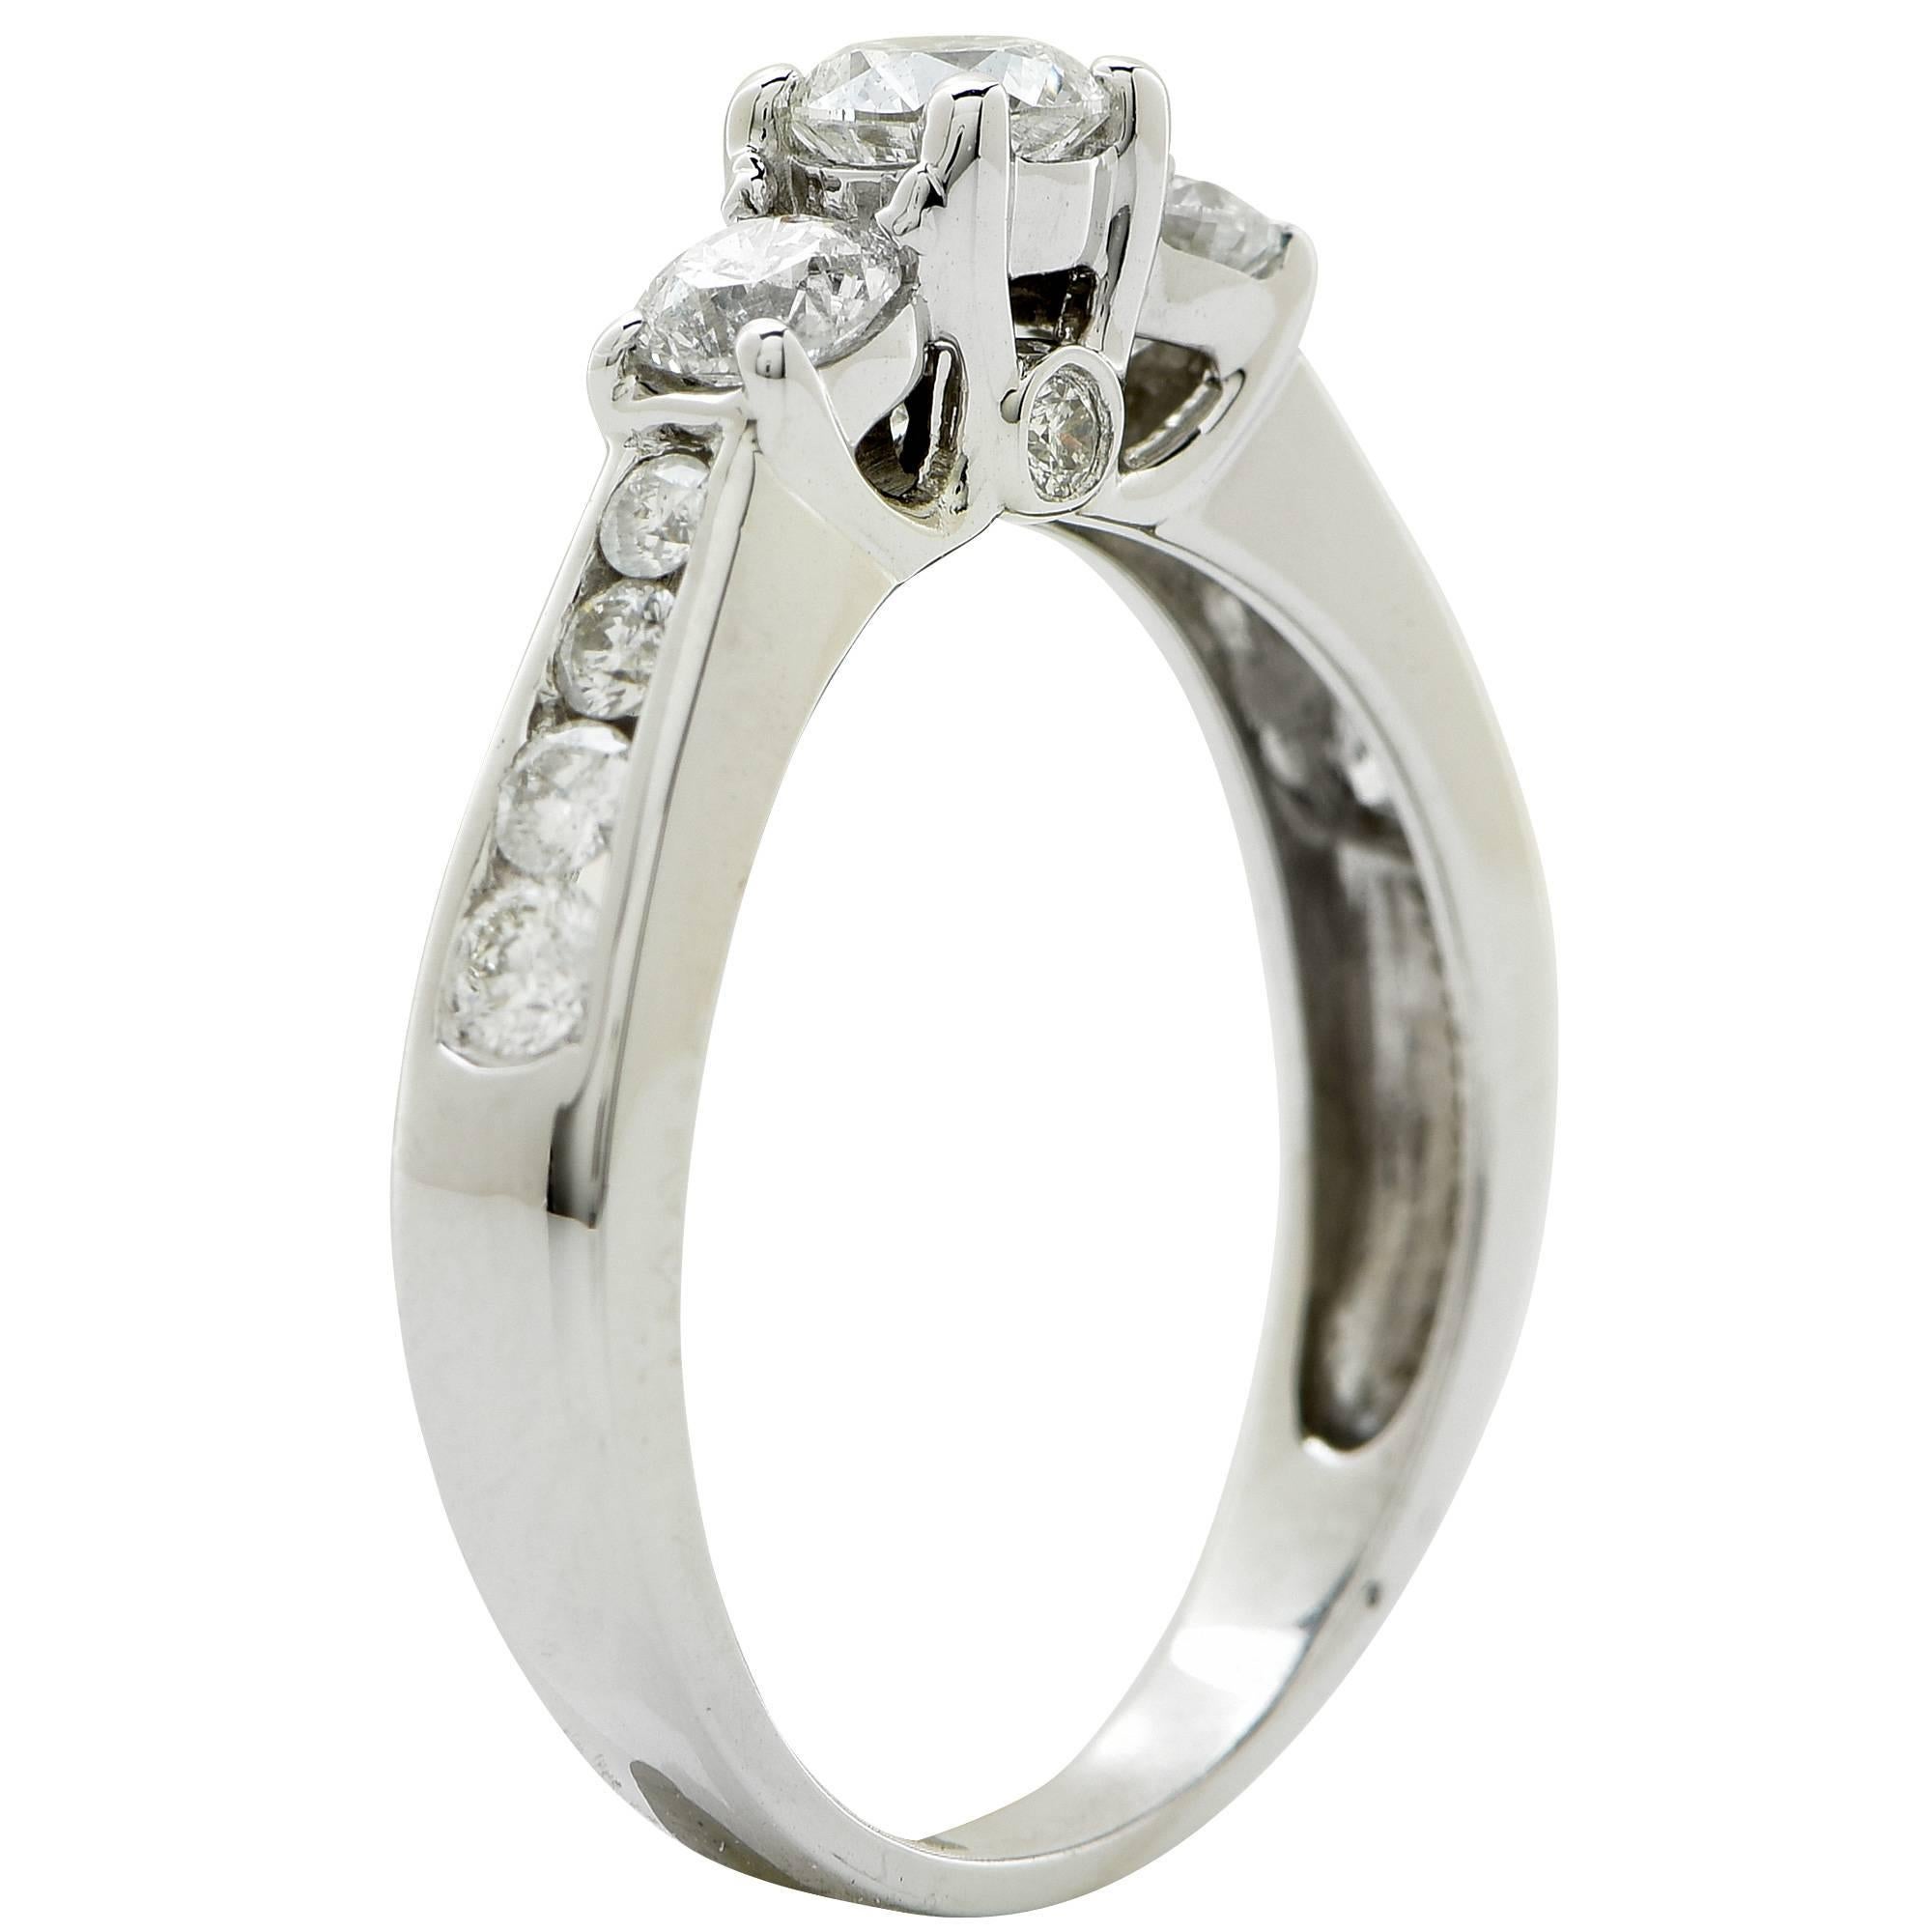 14k white gold engagement ring featuring 13 round brilliant cut diamonds weighing .96cts total, G color SI clarity.

The ring is a size 6 and can be sized up or down.
It is stamped and/or tested as 14k gold.
The metal weight is 3.28 grams.

This